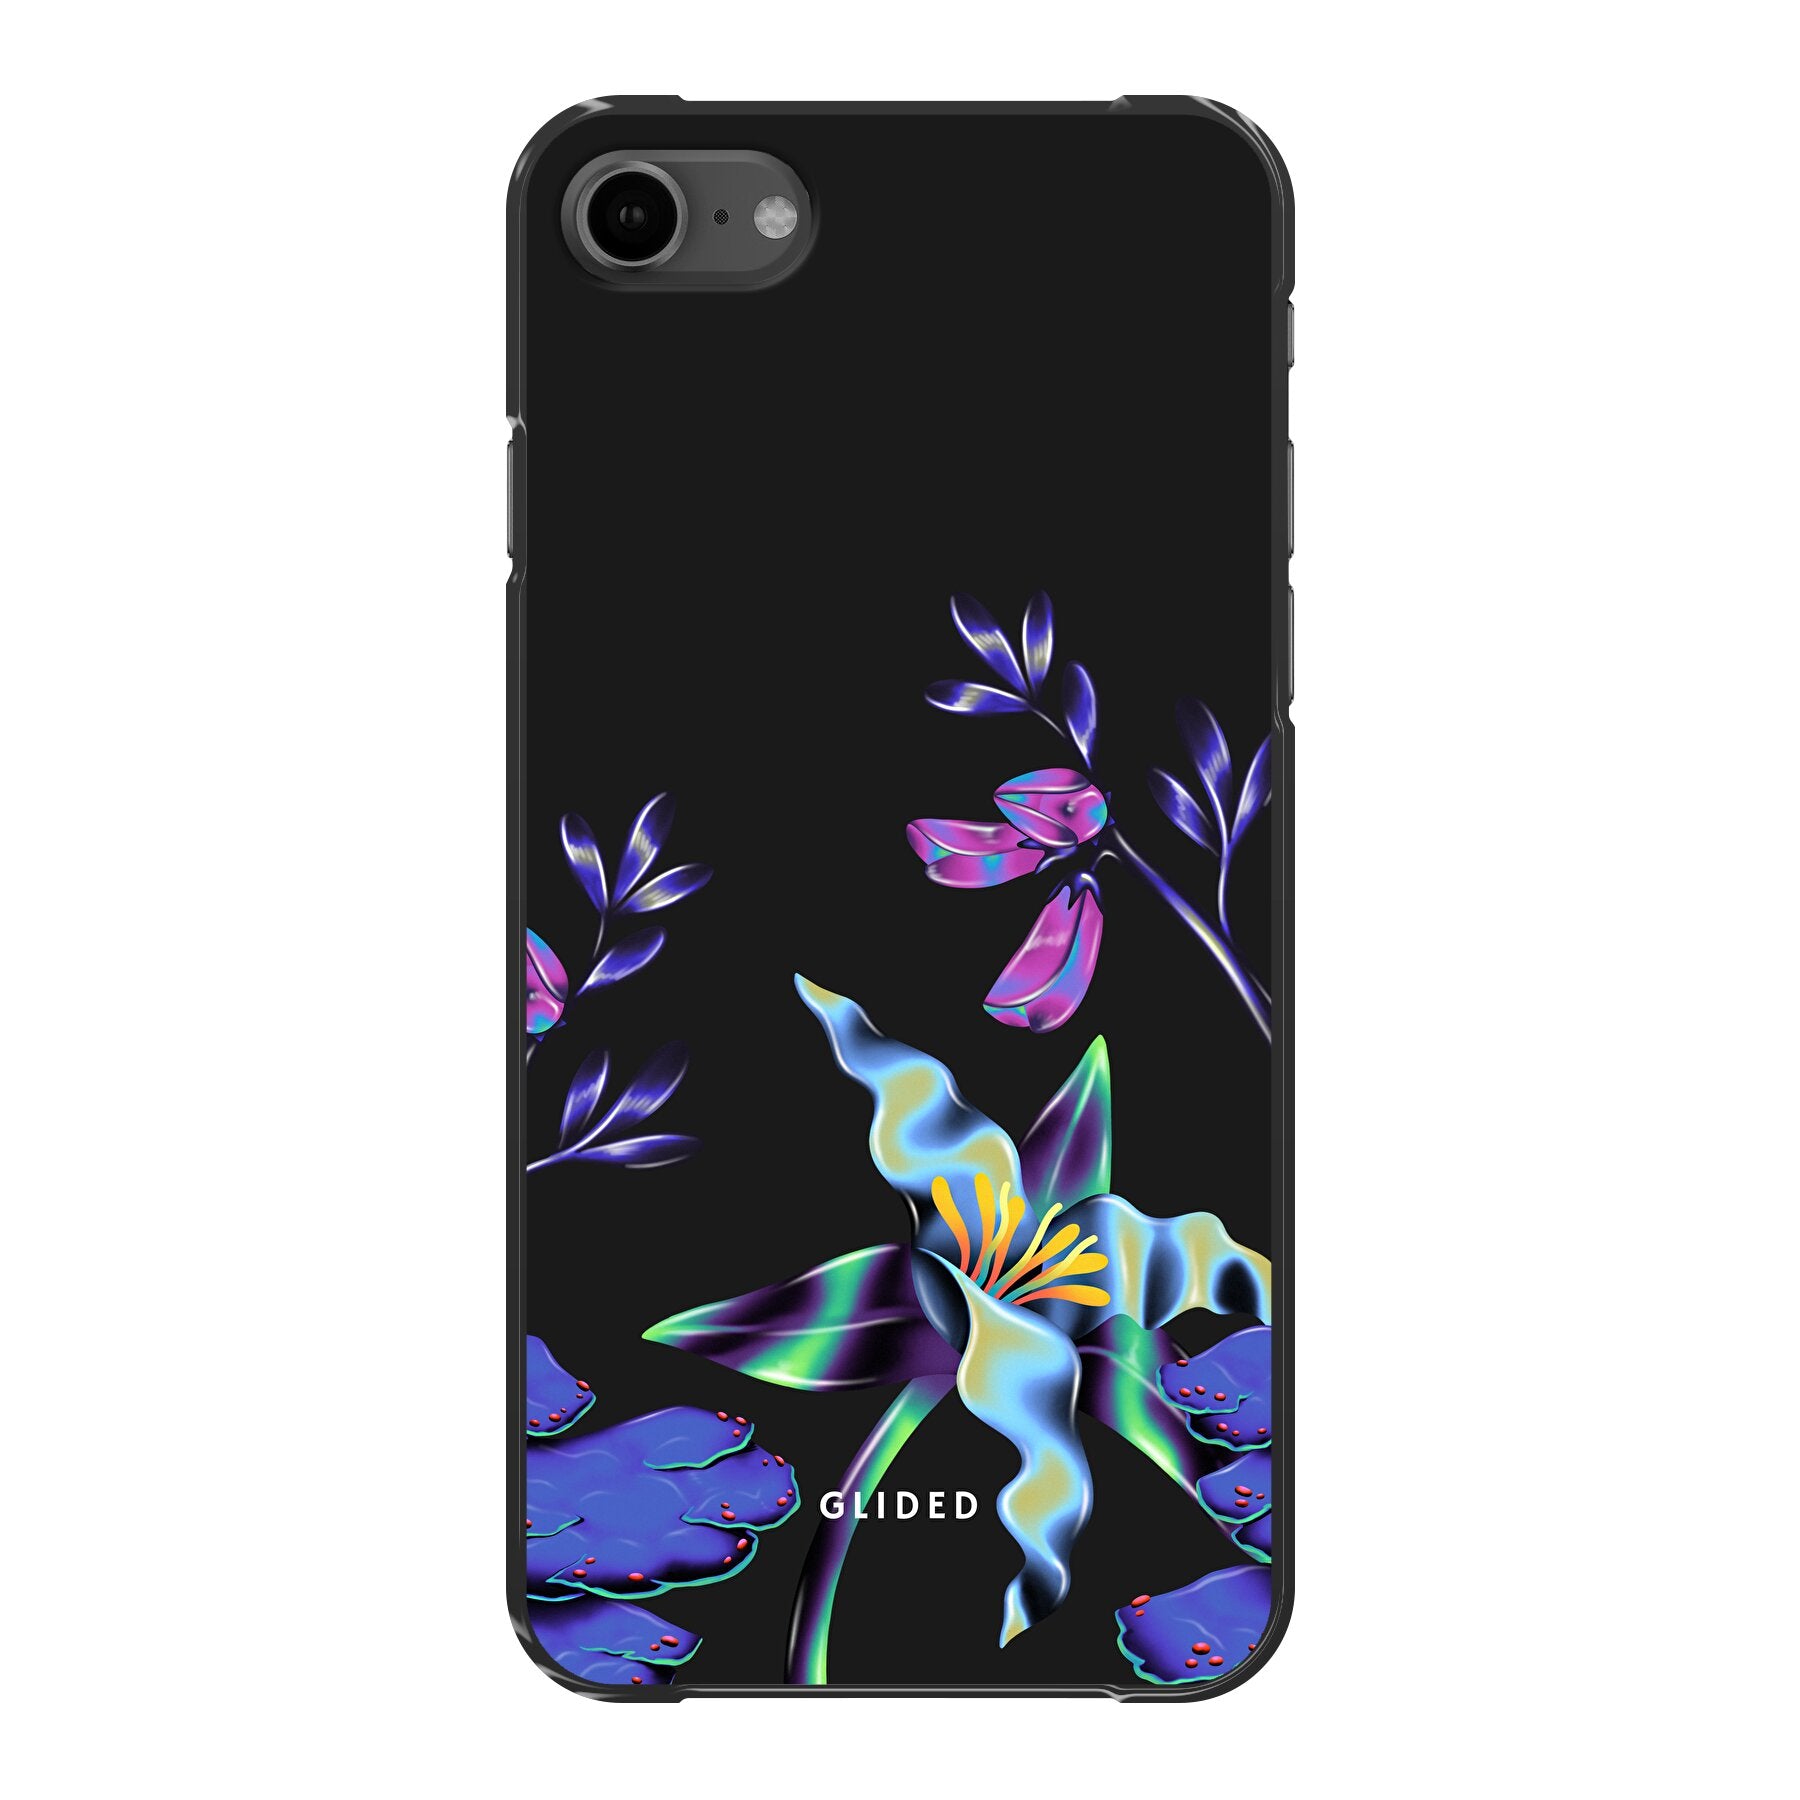 Special Flower - iPhone 7 Handyhülle Hard Case